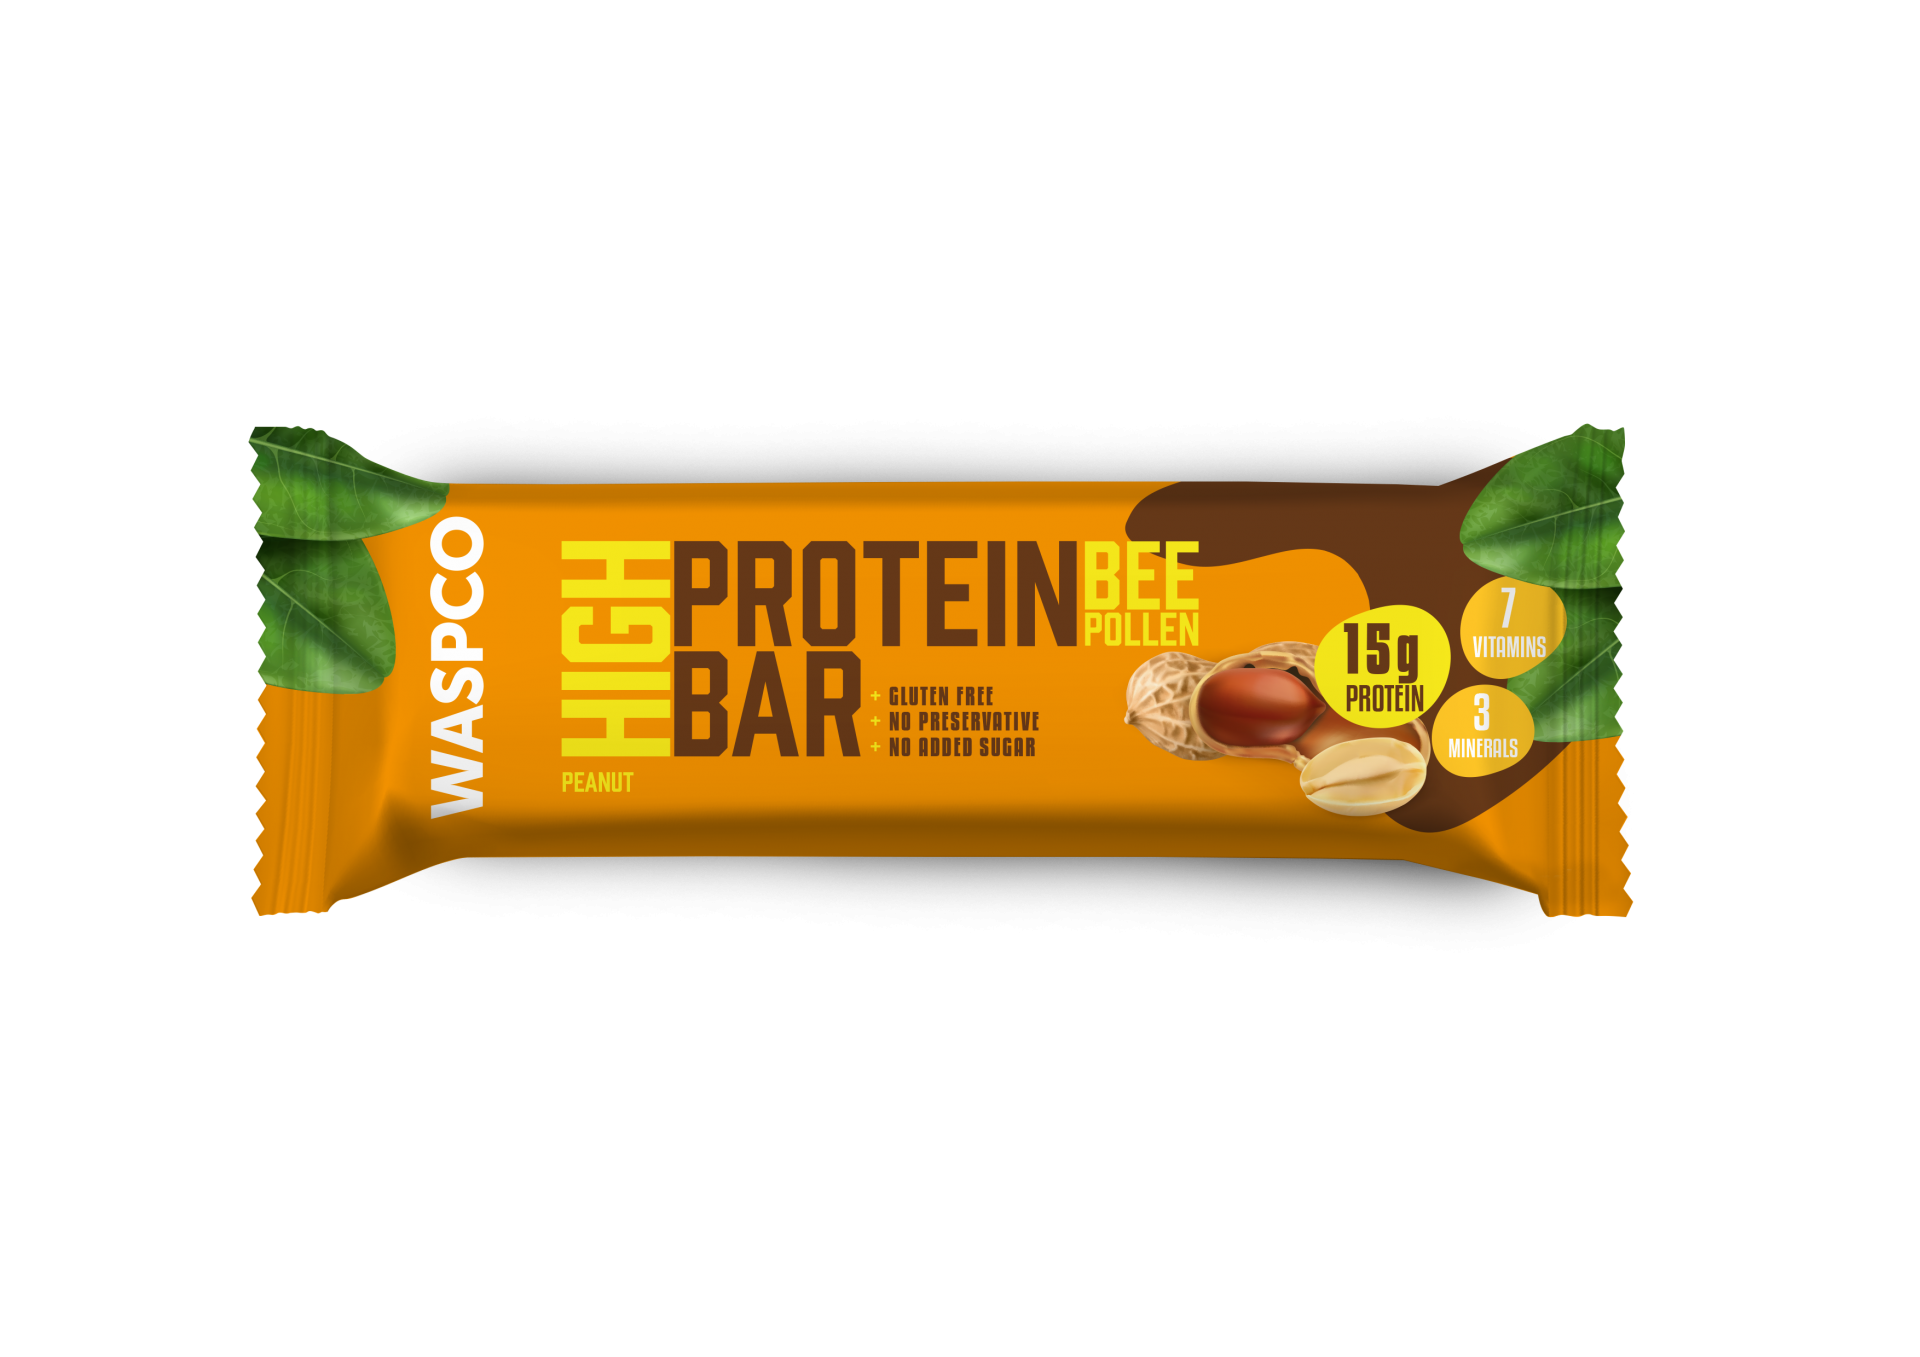 High Protein Bar with Peanut, Bee Pollen and Vitamin-333